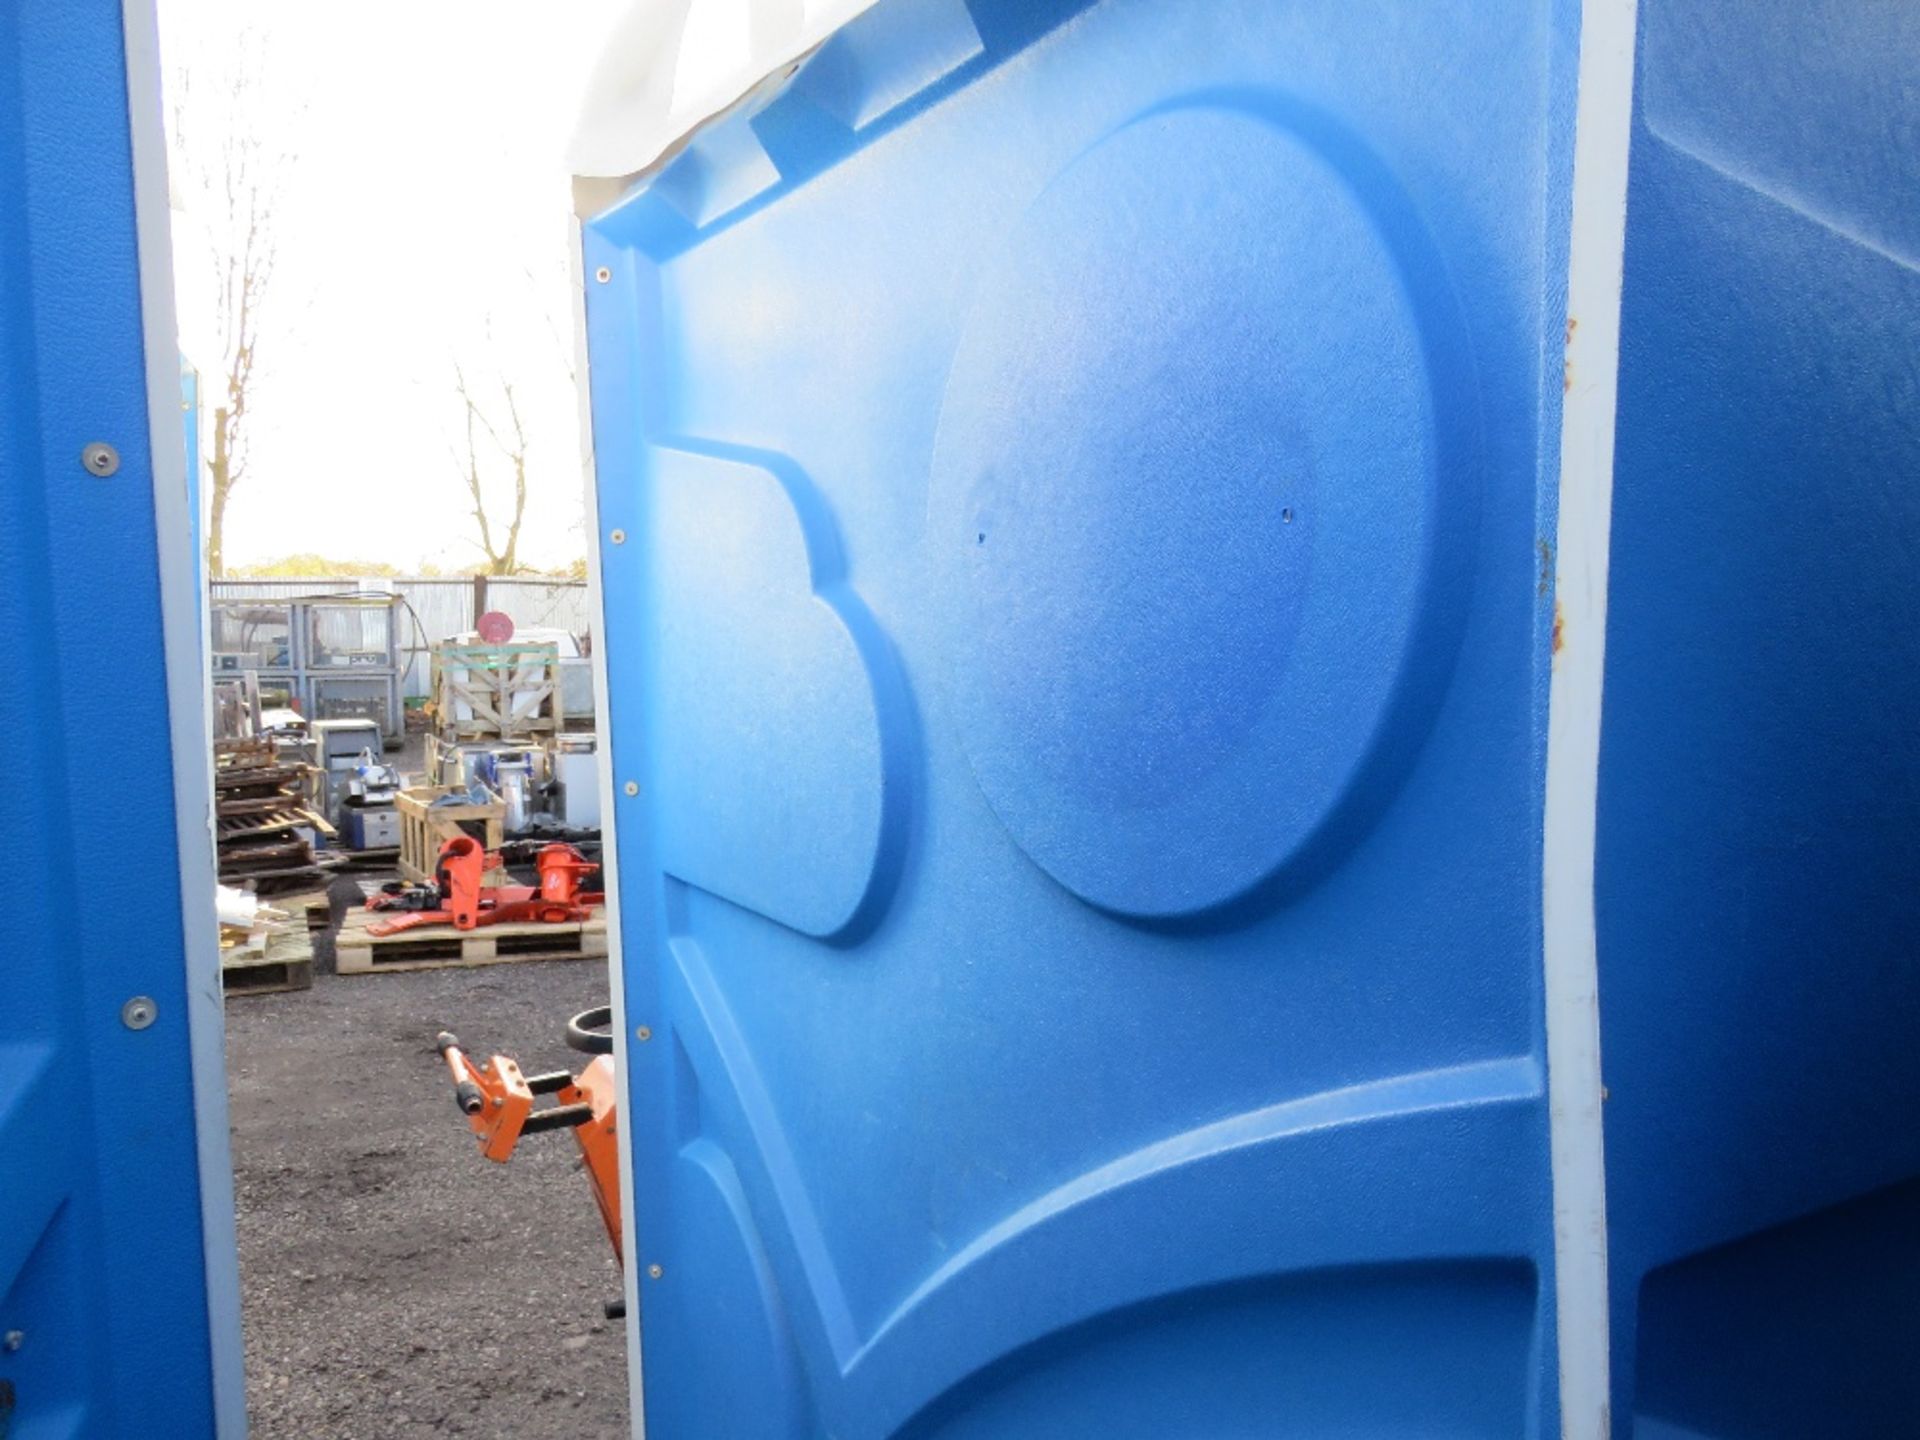 PORTABLE TOILET CUBICLE, IDEAL FOR CHANGING ROOM OR SHOWER ETC - Image 5 of 5